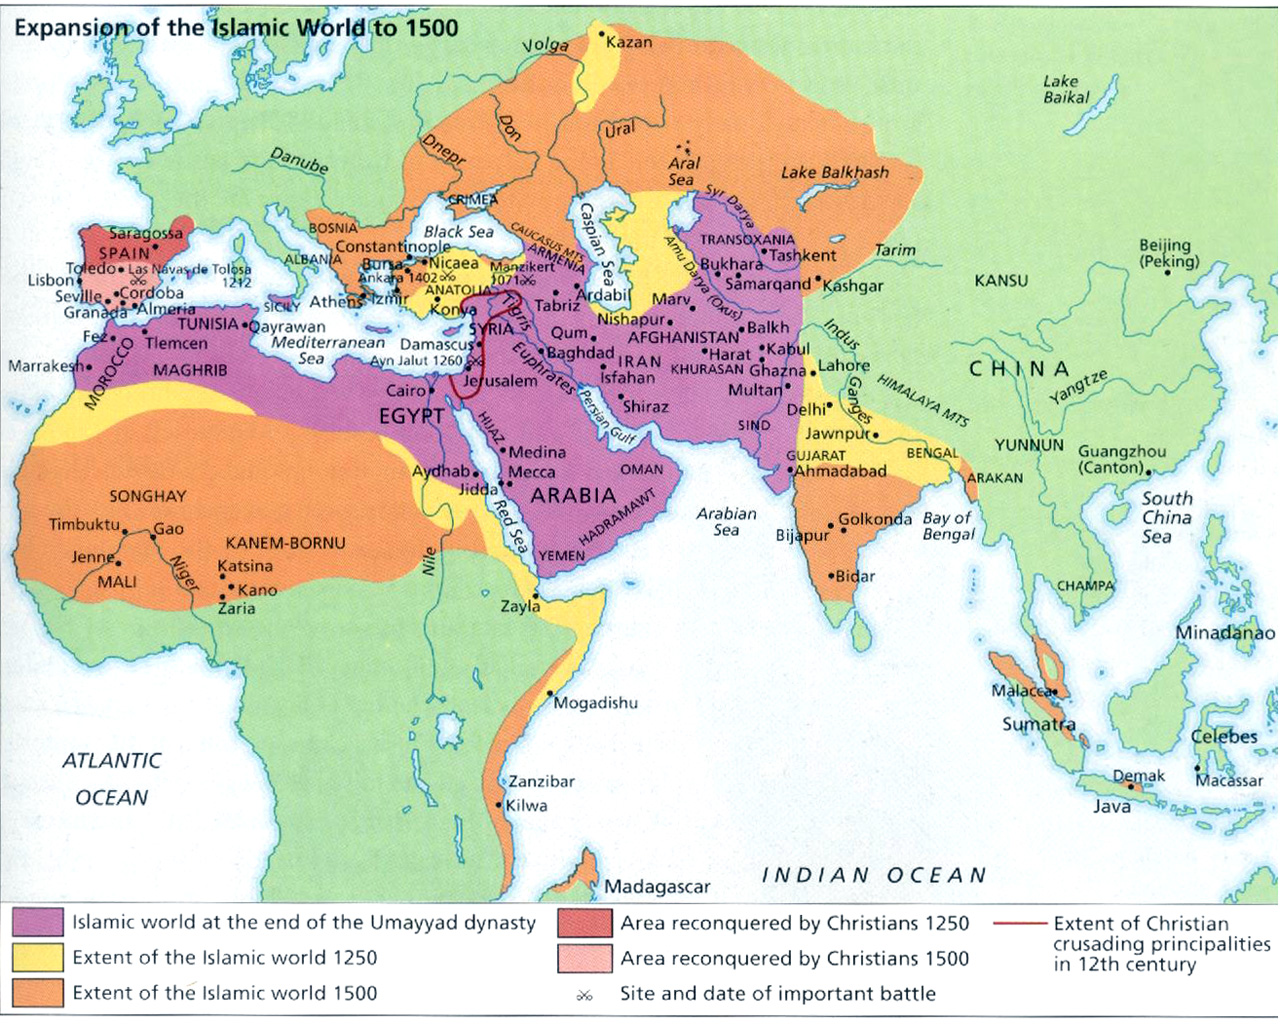 Map of the expansion of the Islamic world to 1500